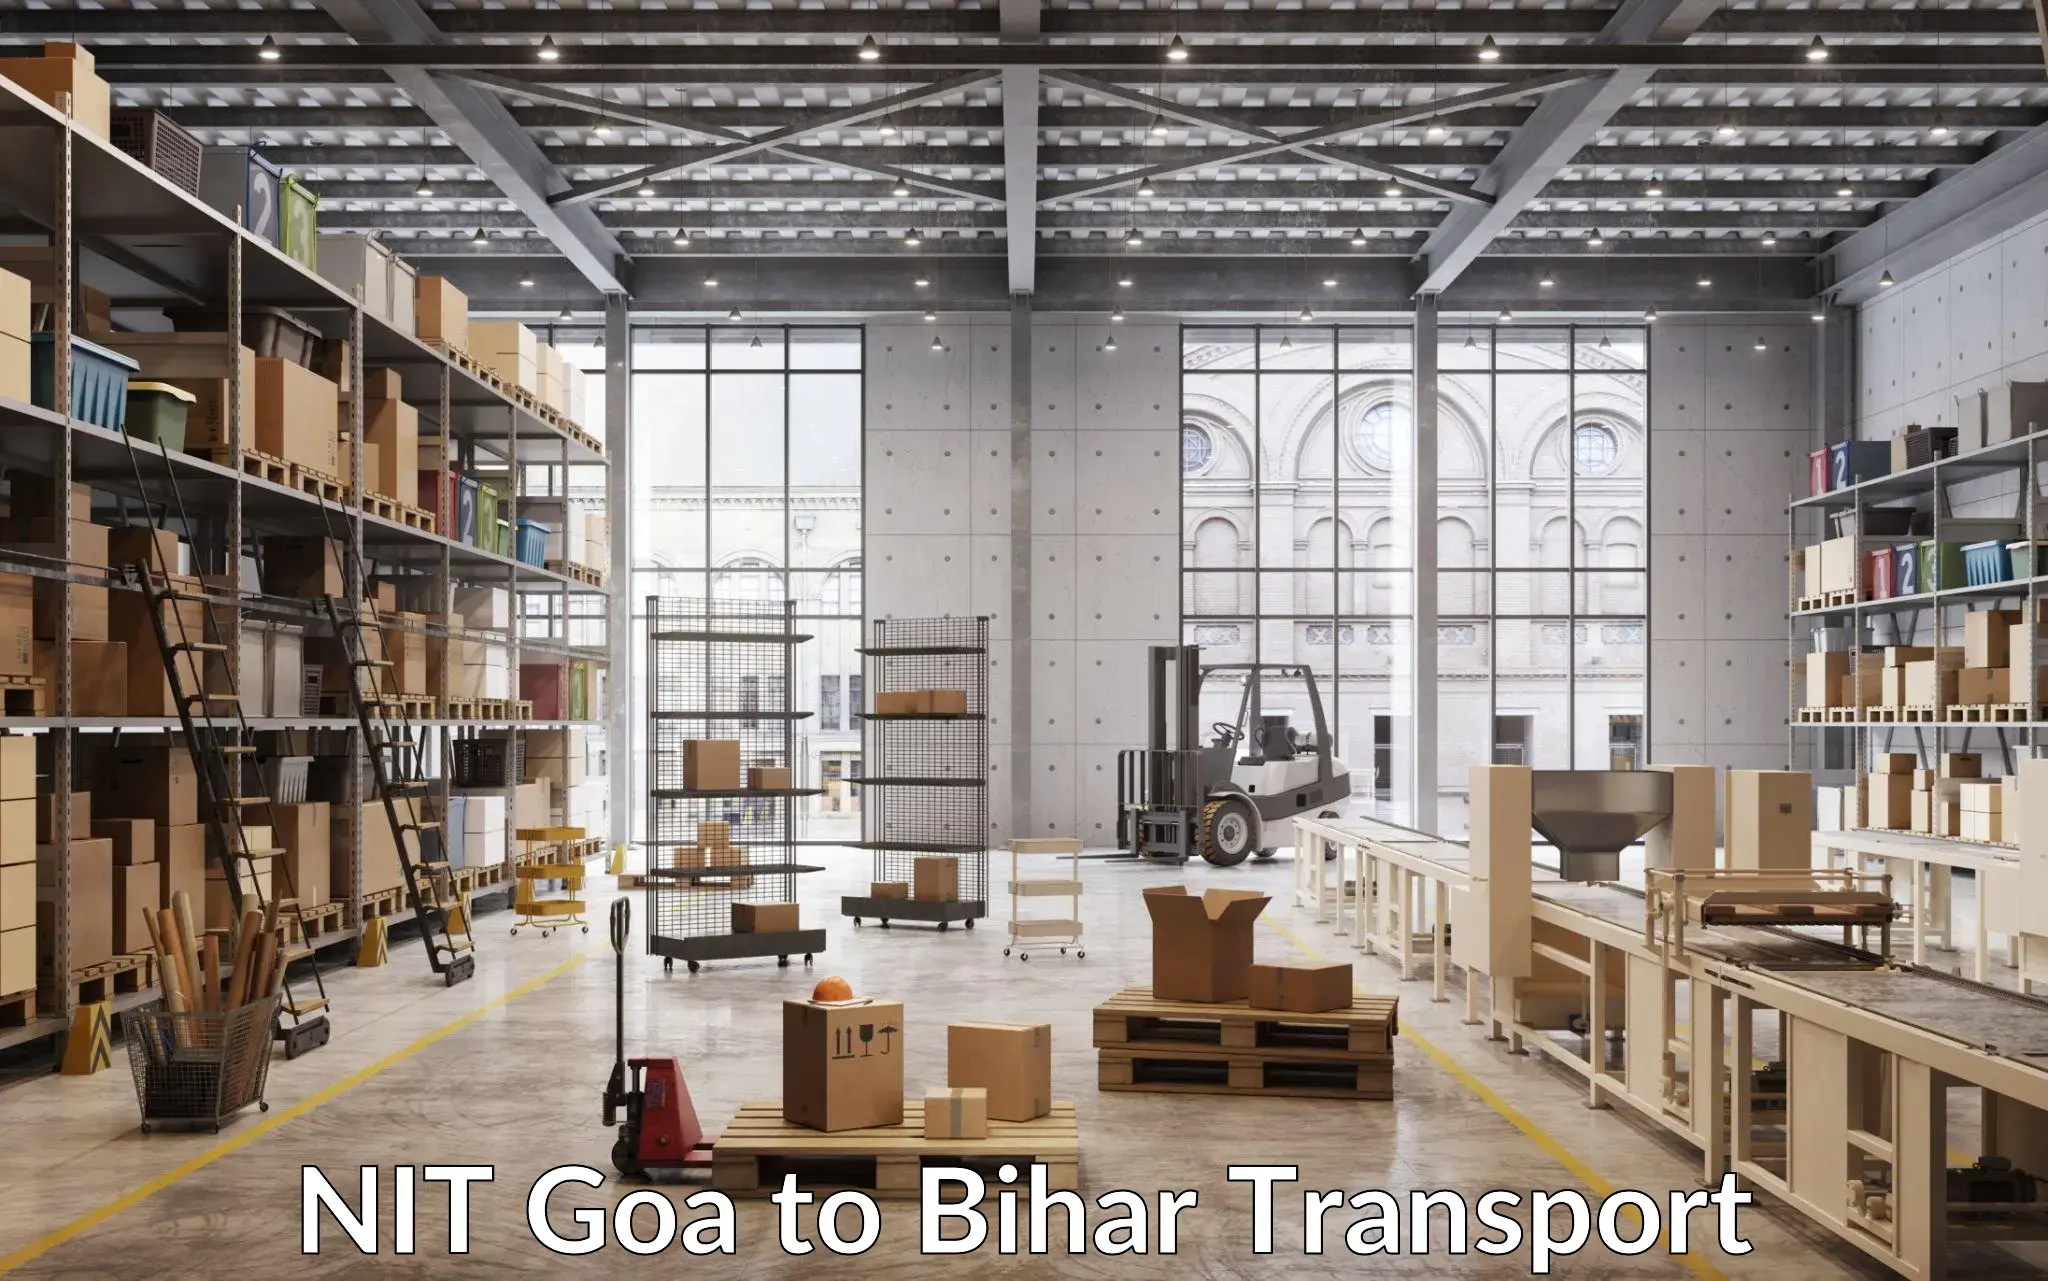 Domestic transport services NIT Goa to Dighwara